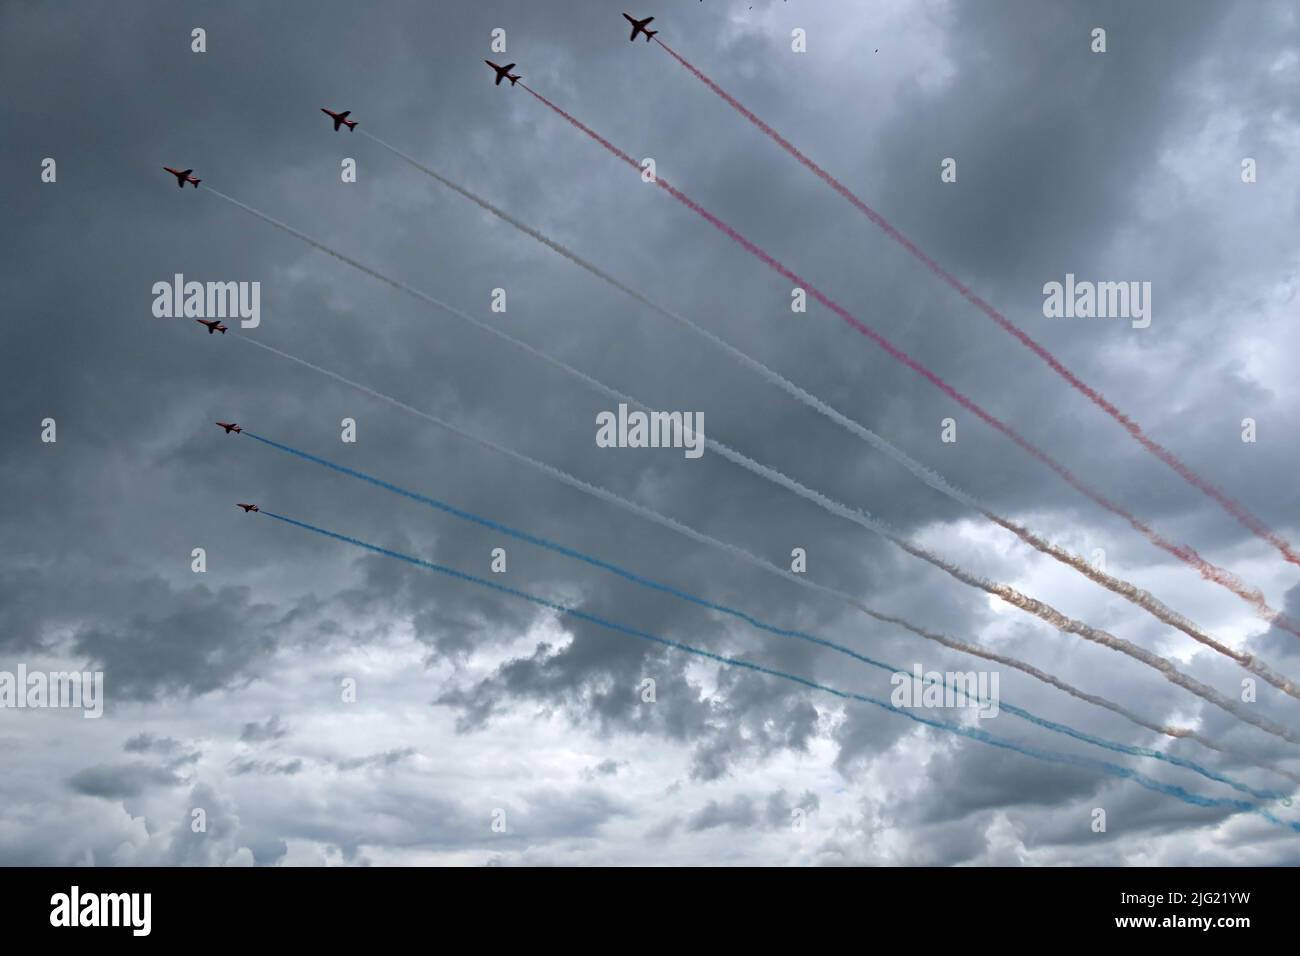 The famous British RAF Red Arrows,red, white, blue, smoke trails, overhead at Silverstone F1 Grand Prix, Towcester, Northamptonshire, England,NN12 8TL Stock Photo